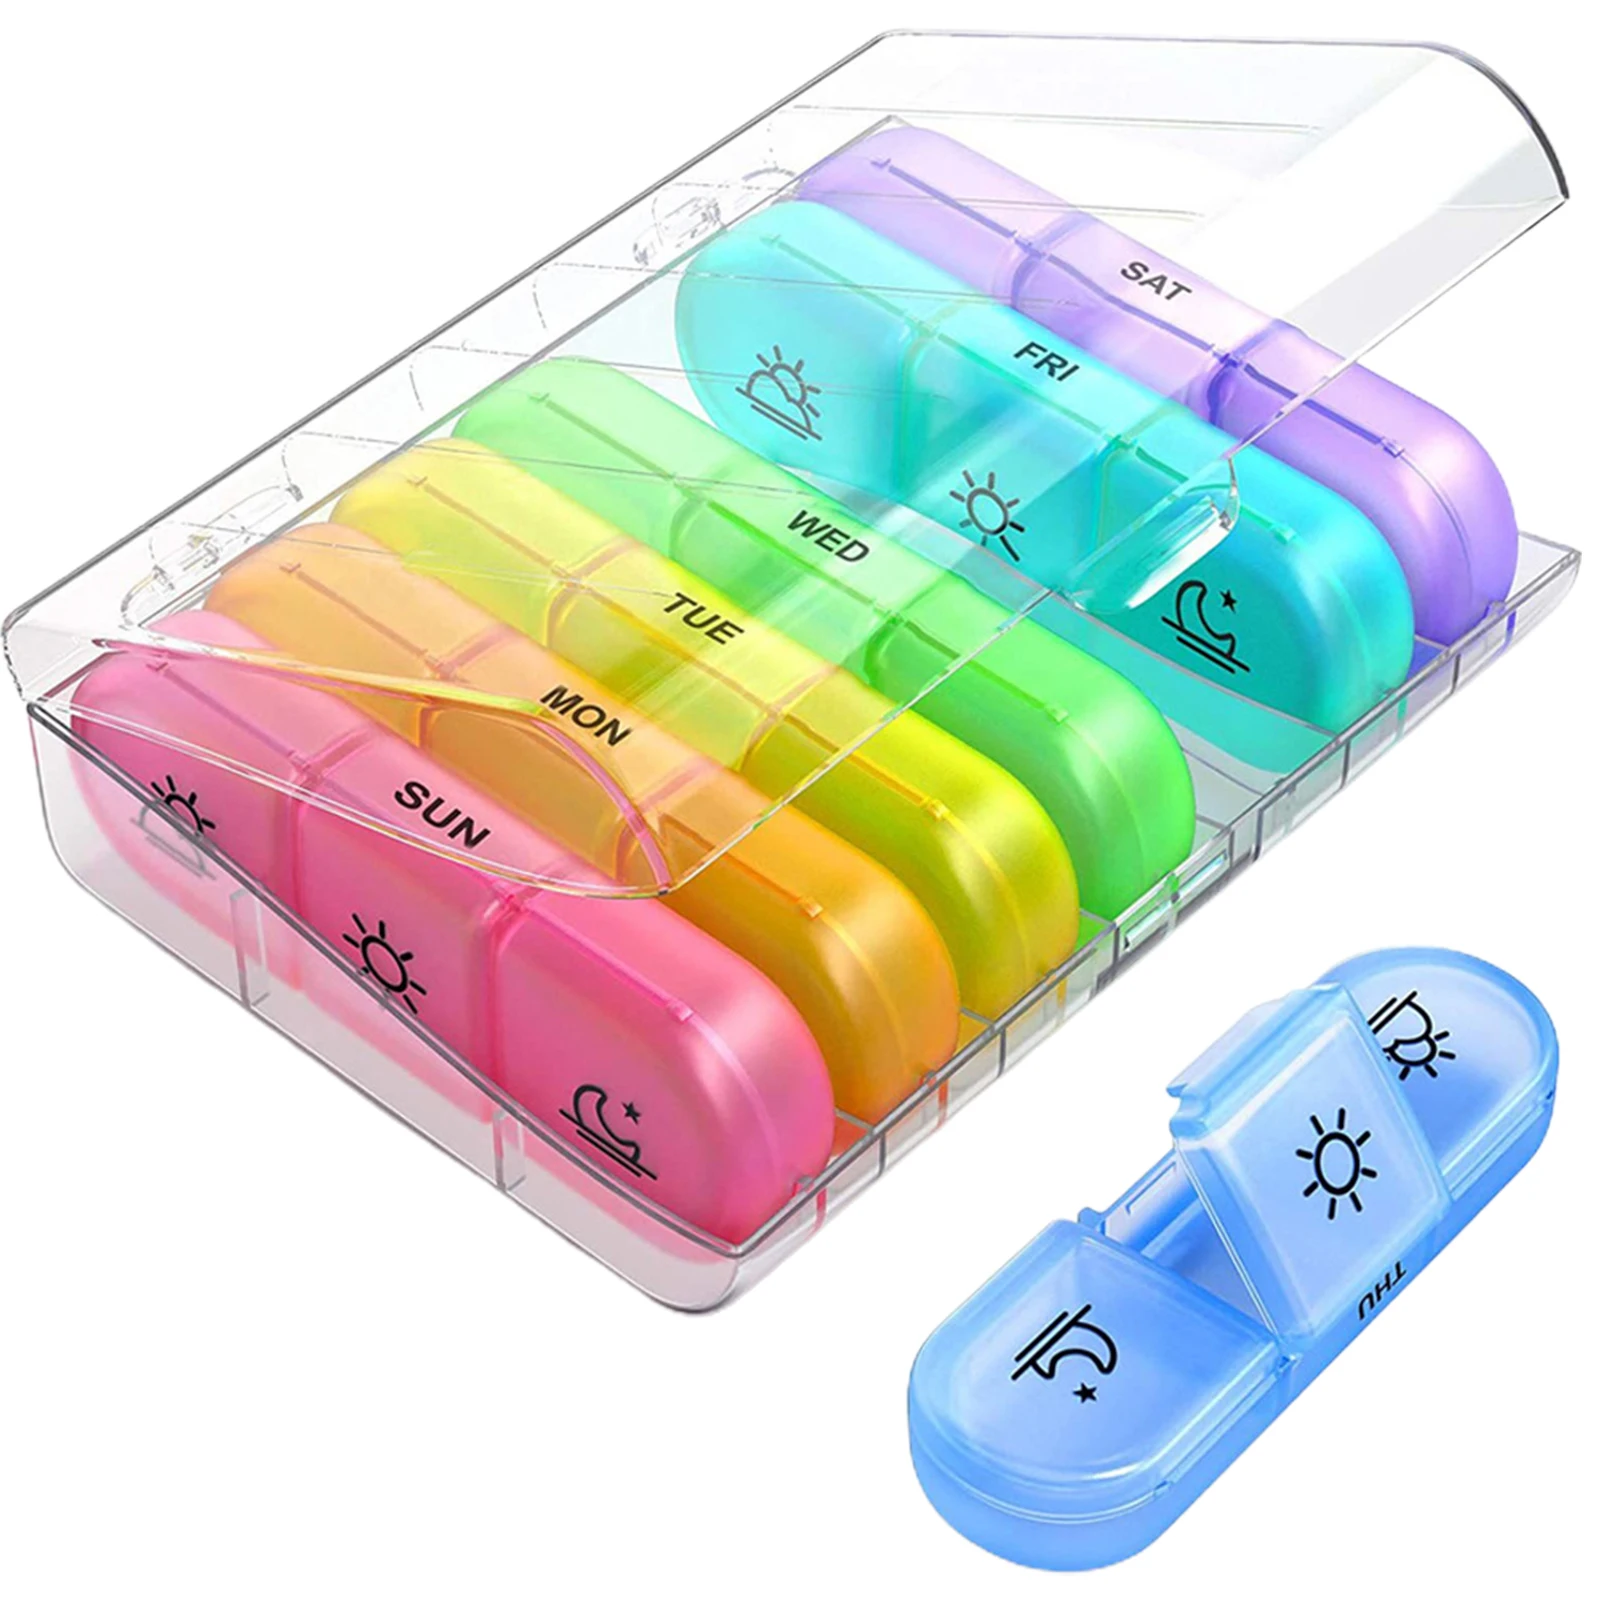 

Daily Medicine Organiser 7days Weekly Removable Dustproof Travel Medication Box 21 Grids Pill Vitamin Supplement Candy Storage